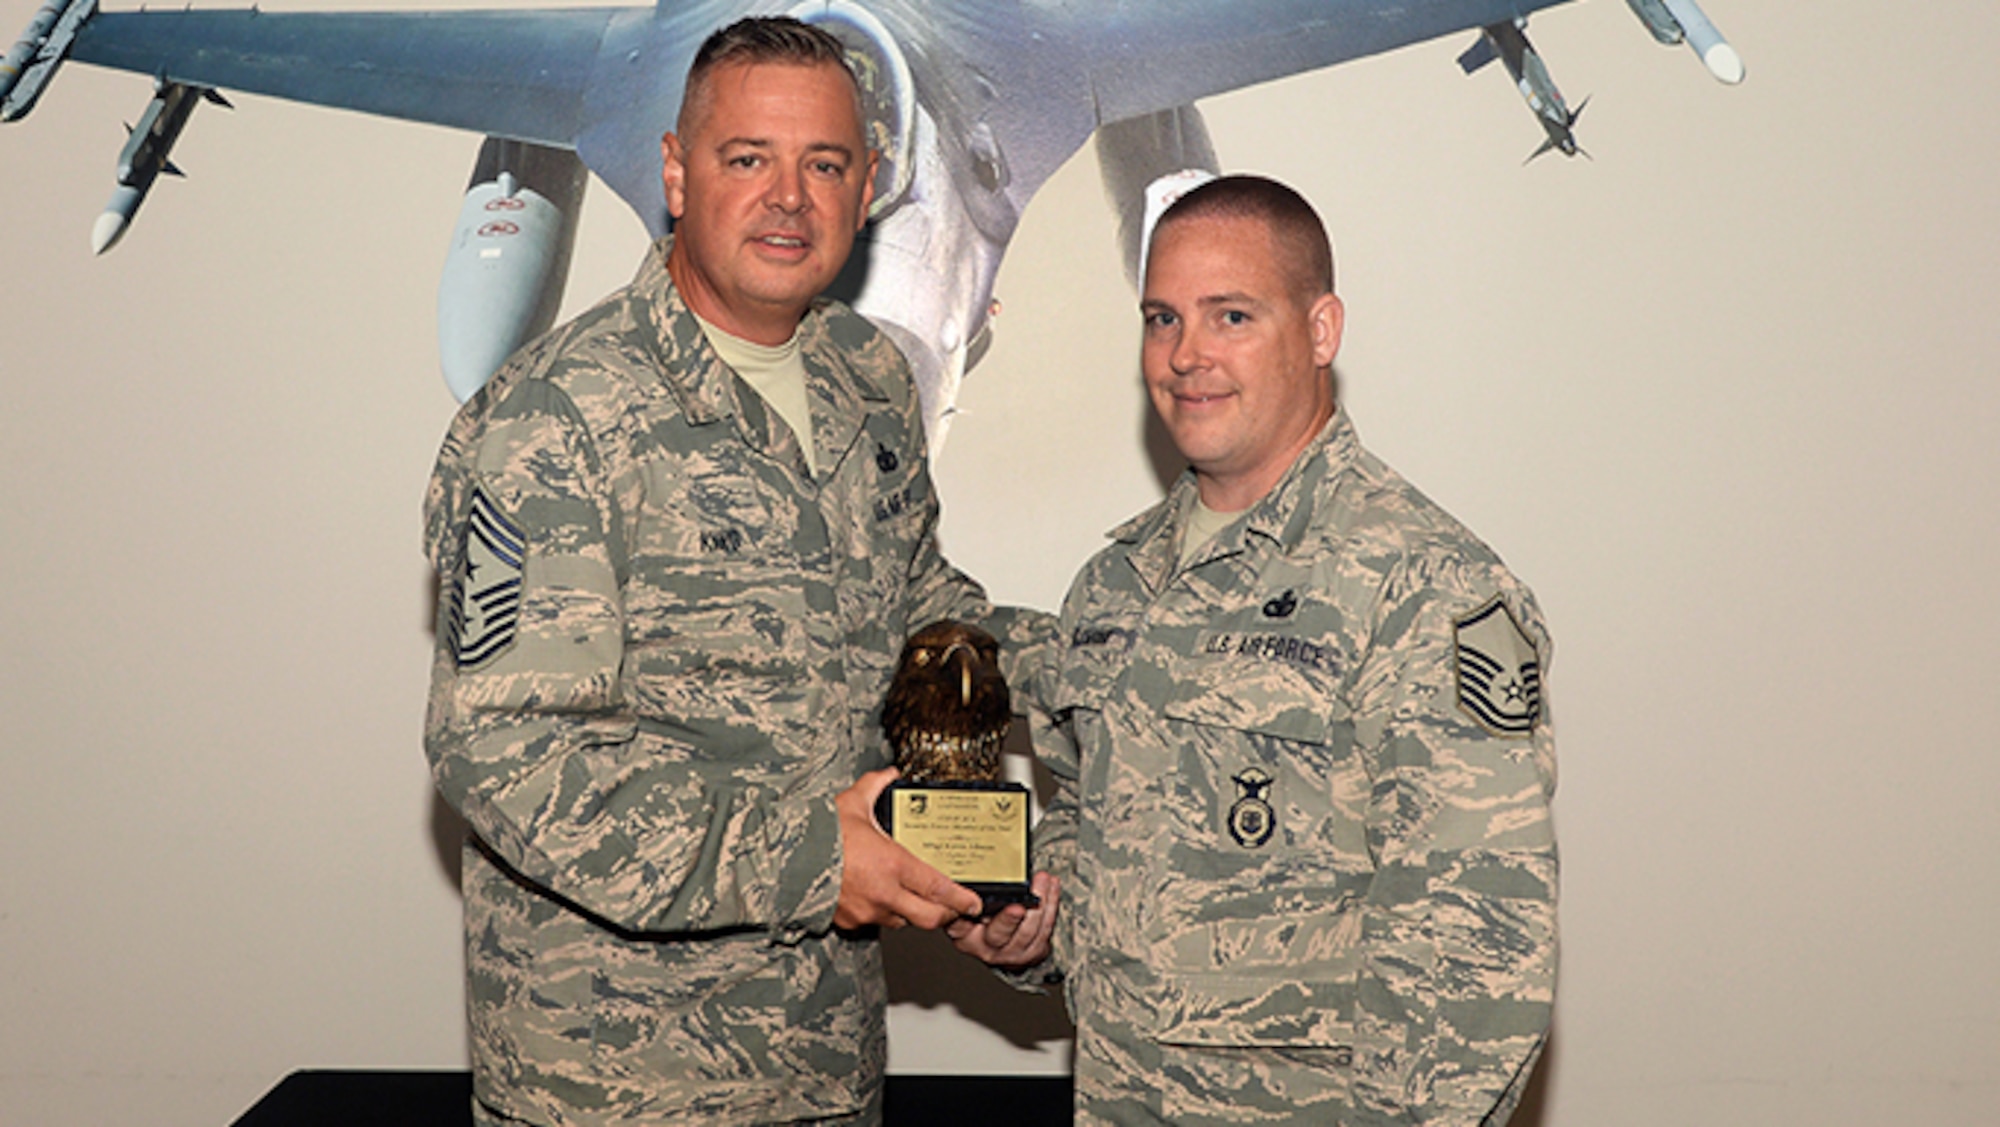 A picture of U.S. Air Force 1st Air Force Command Chief Master Sgt. Richard King presenting Master Sgt. Kevin Allman with the award for the Continental NORAD Region Aerospace Control Alert Security Forces Member of the Year.